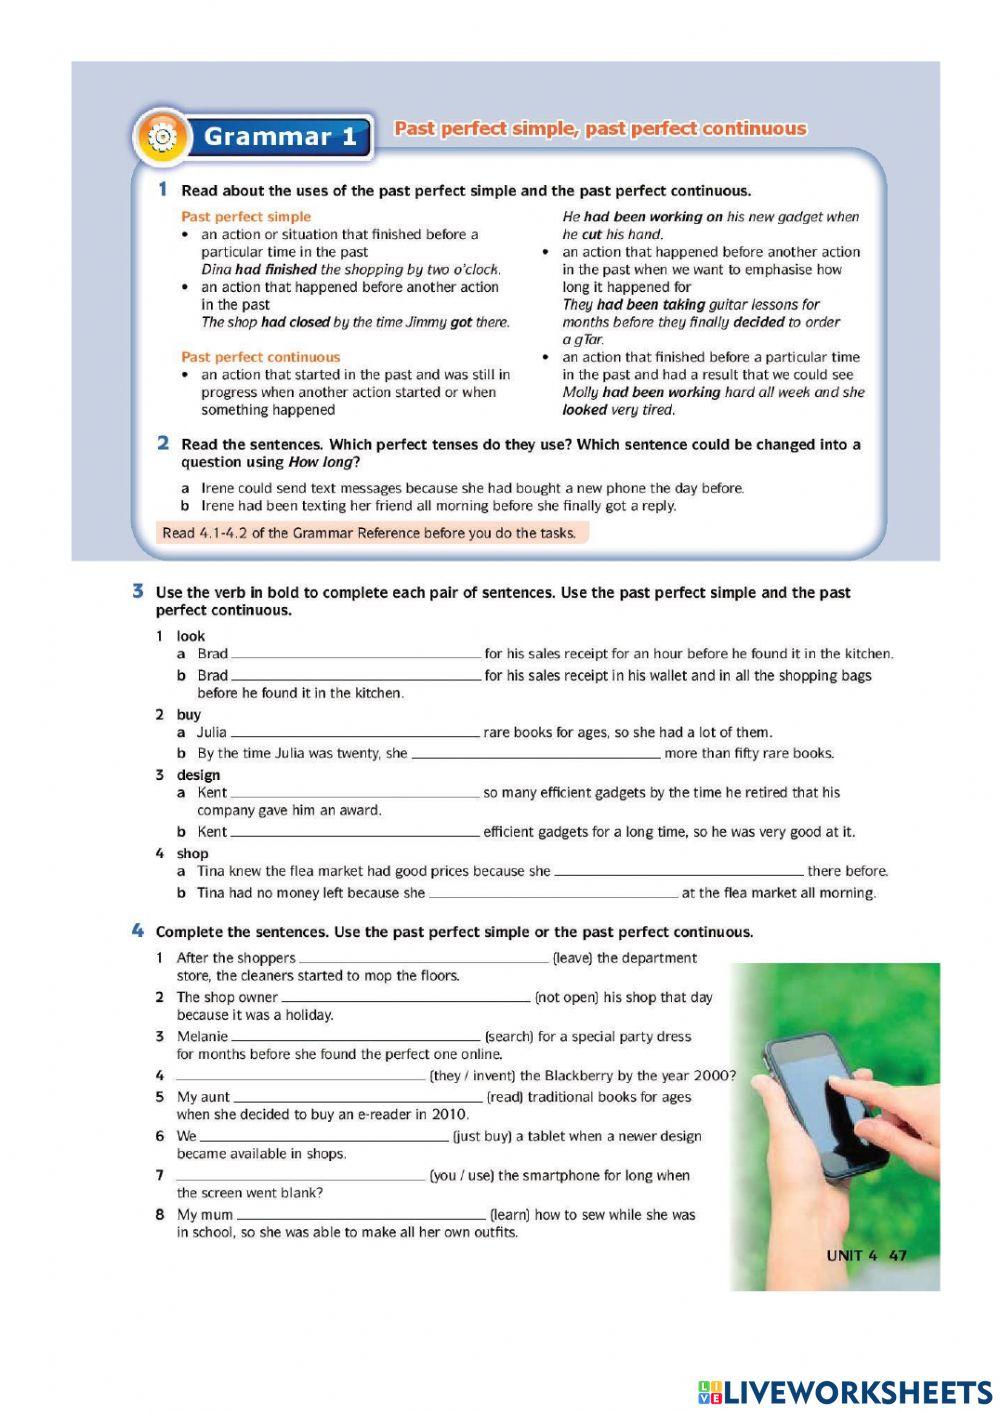 English Download Form 5: Unit 4 page 47 &49